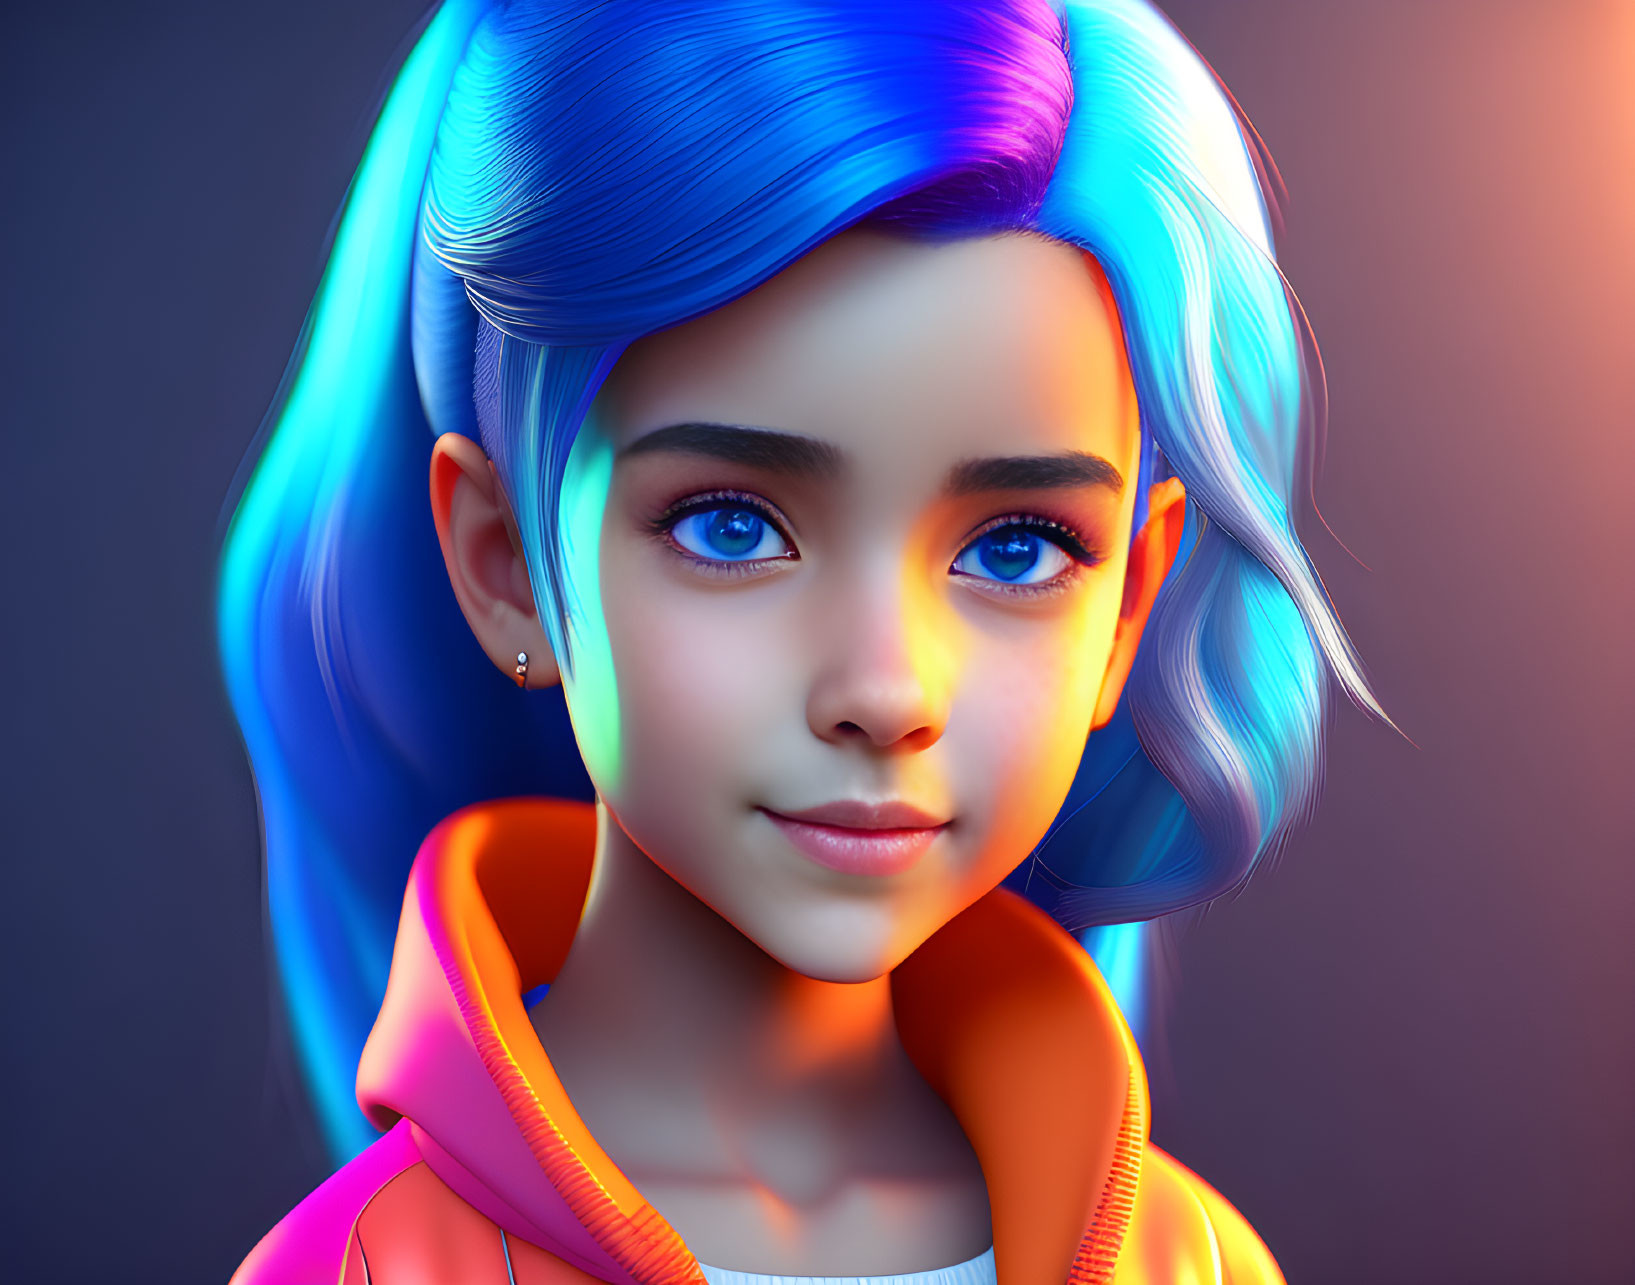 Vibrant Blue-Haired Girl in Neon Pink Jacket Portrait